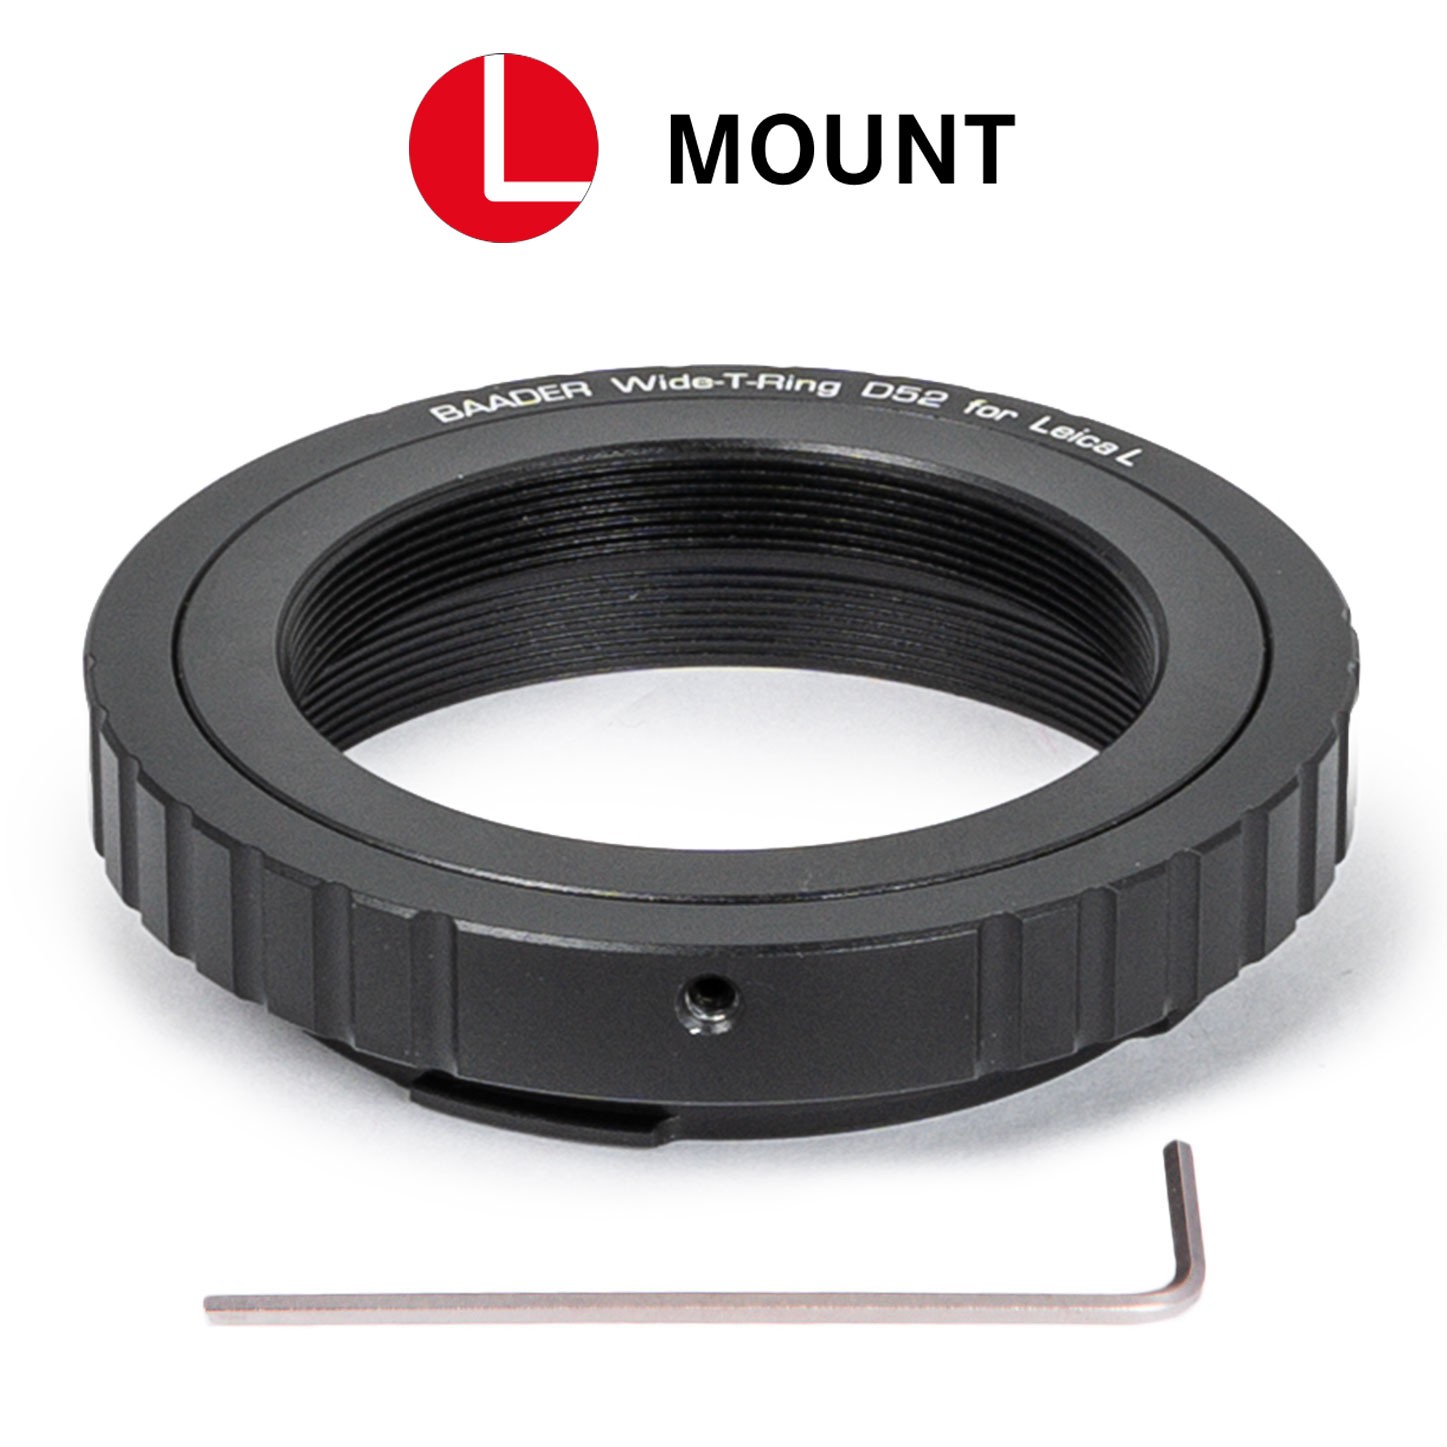 Wide-T-Ring for Leica, with D52i to T-2 and